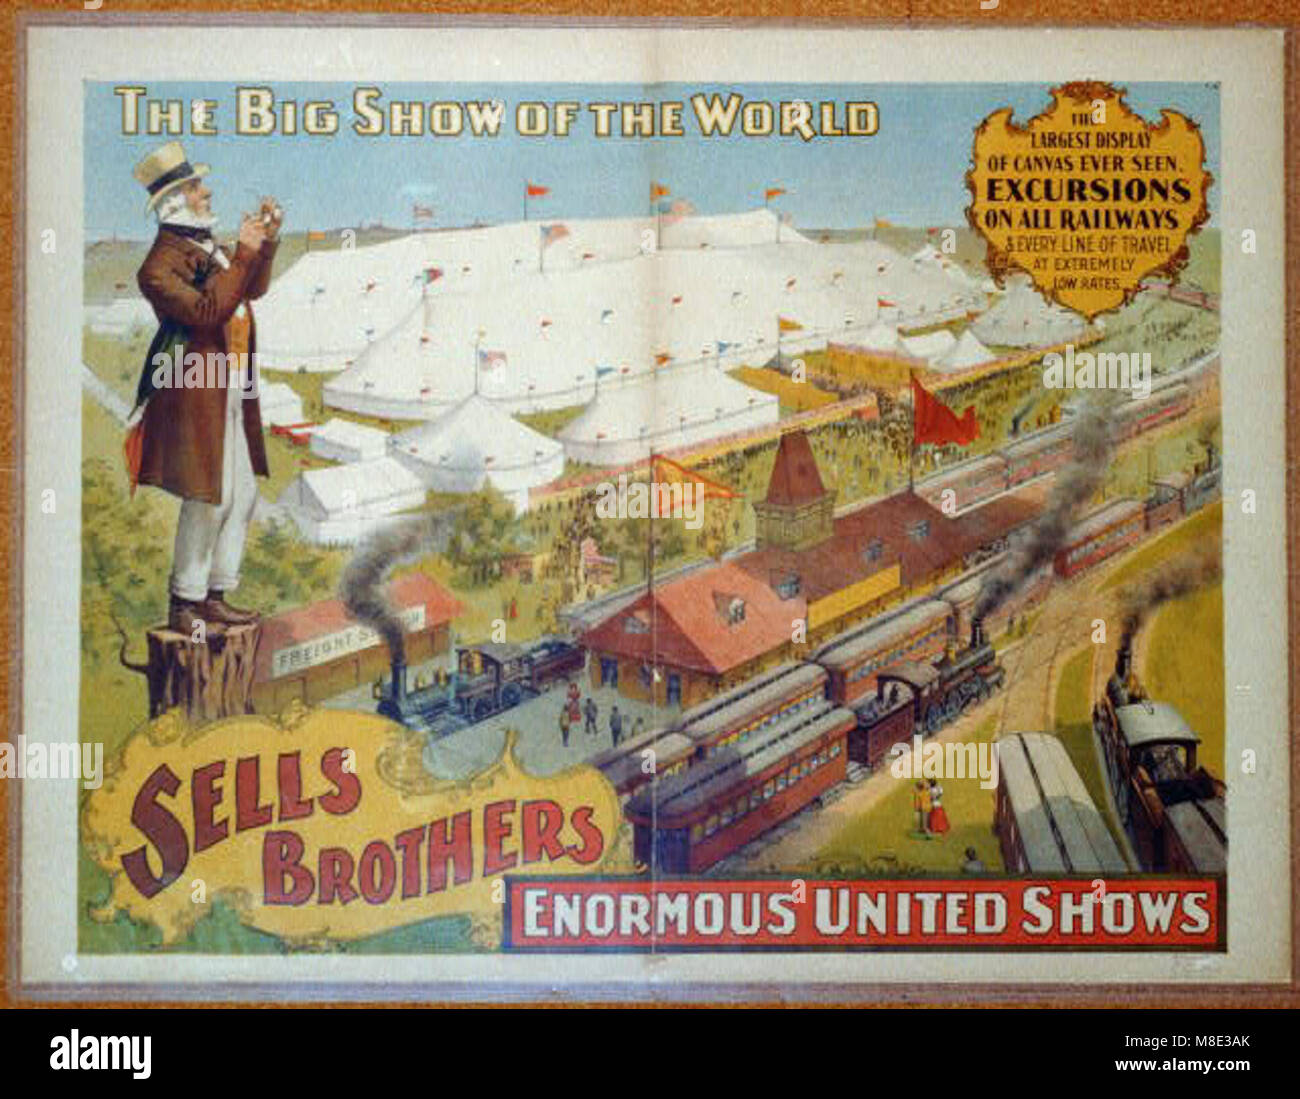 Sells Brothers Enormous United Shows ... The big show of the world ... LCCN2002719023 Stock Photo